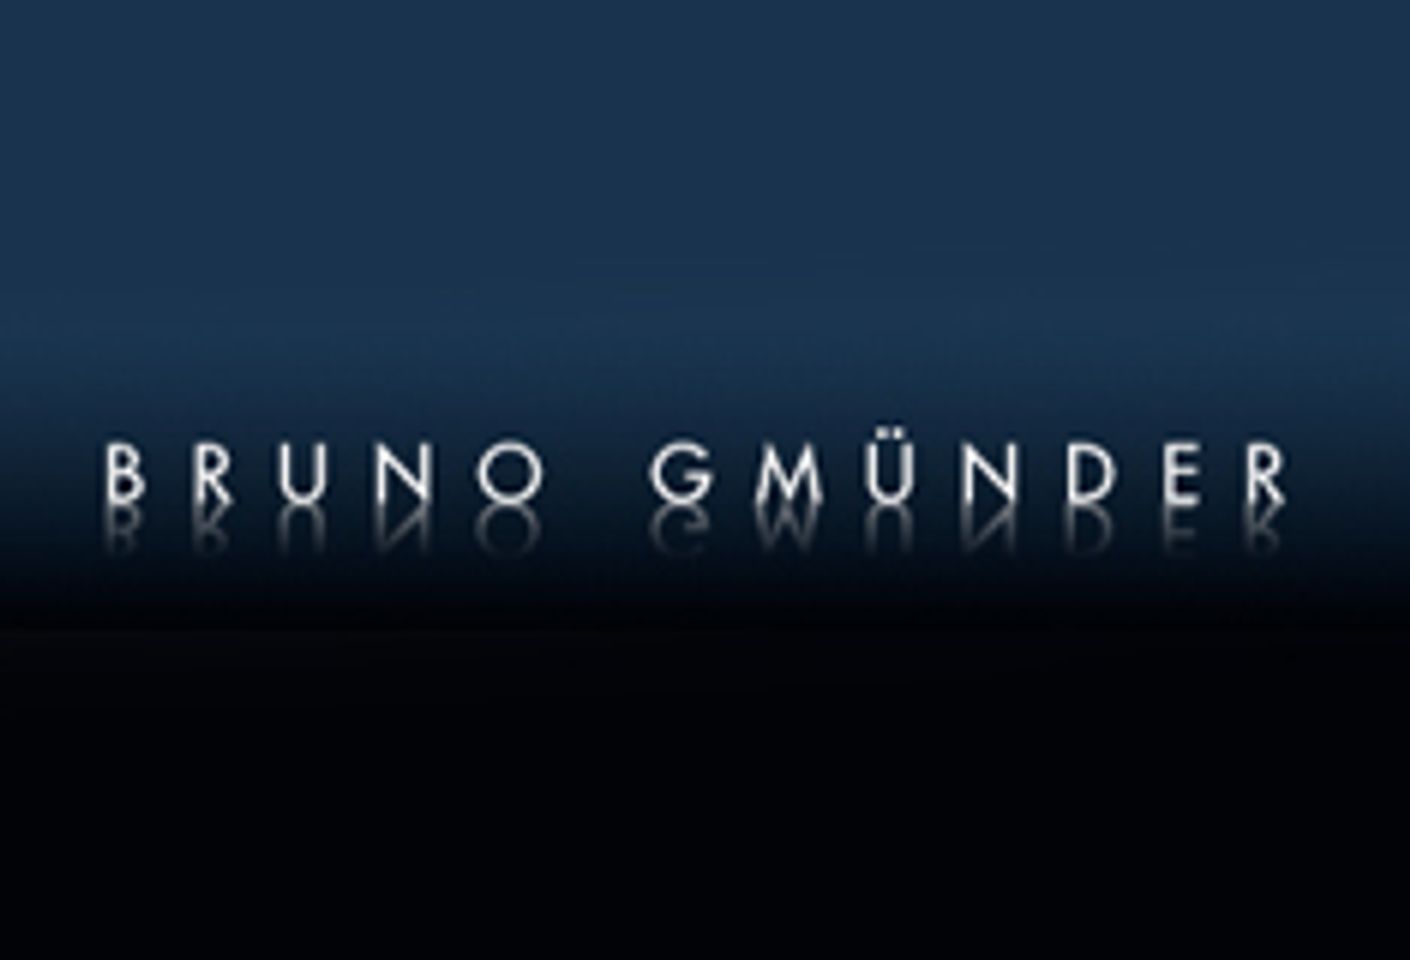 Bruno Gmuender to Publish 3 New Books in March